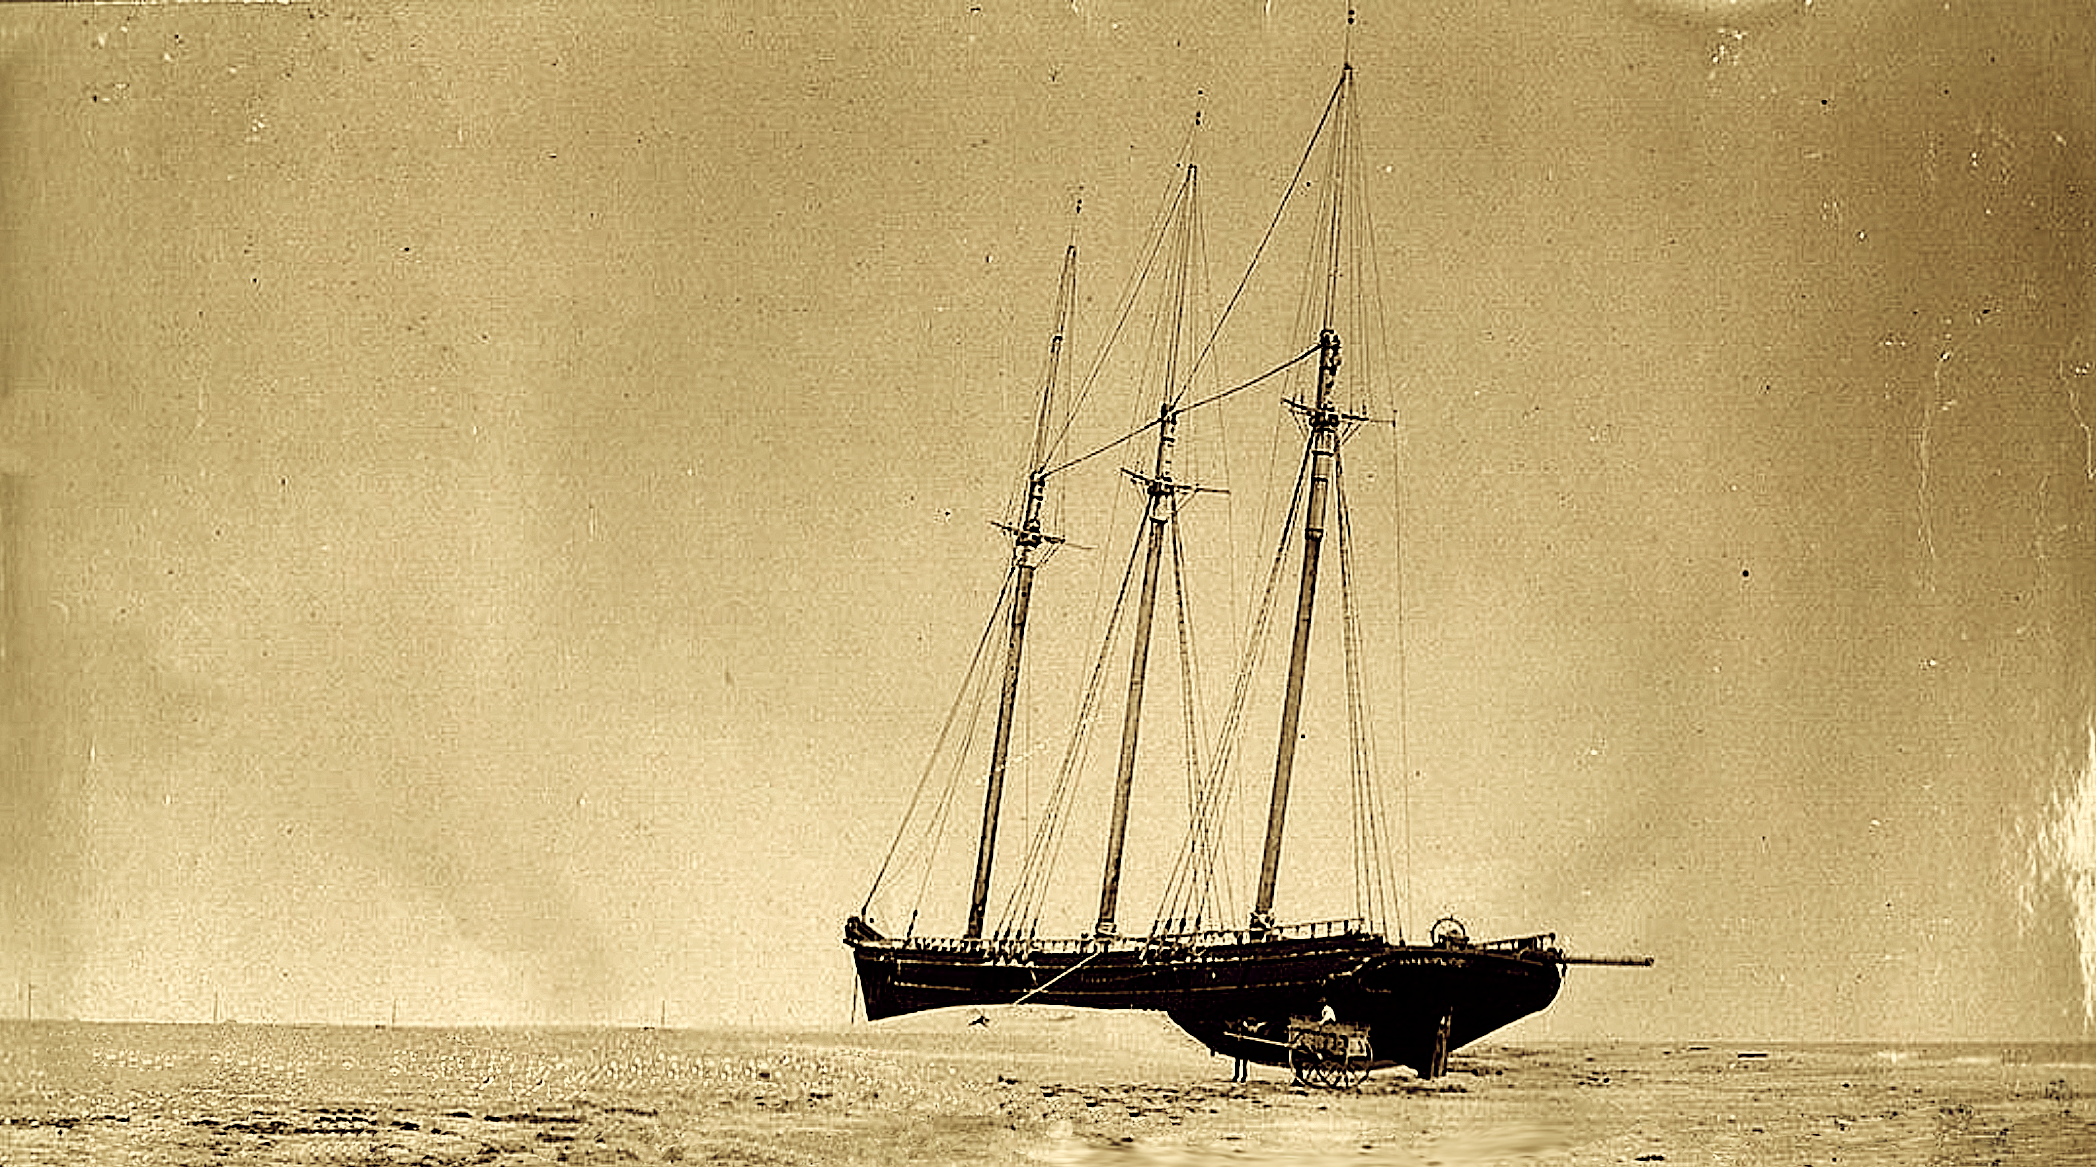 The E.S. Newman (here, aground after the hurricane passed), carried nine passengers. The Pea Island Surfmen reportedly rescued the captain's 3-year-old son first, then the captain's wife and the six crew members one by one, before finally bringing the captain to shore.